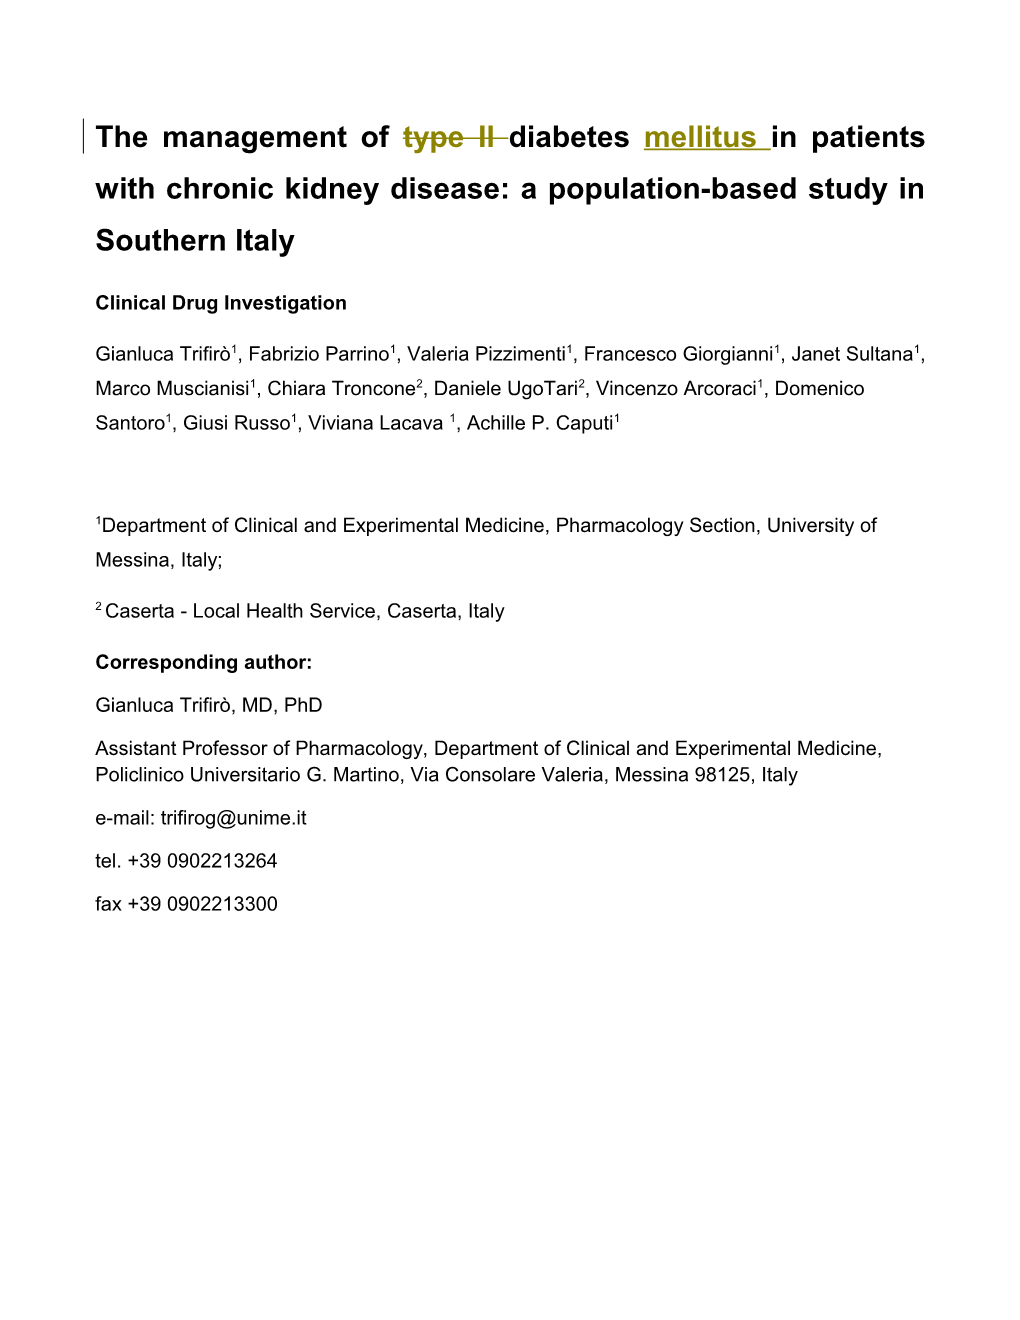 The Management of Type II Diabetes Mellitus in Patients with Chronic Kidney Disease: A